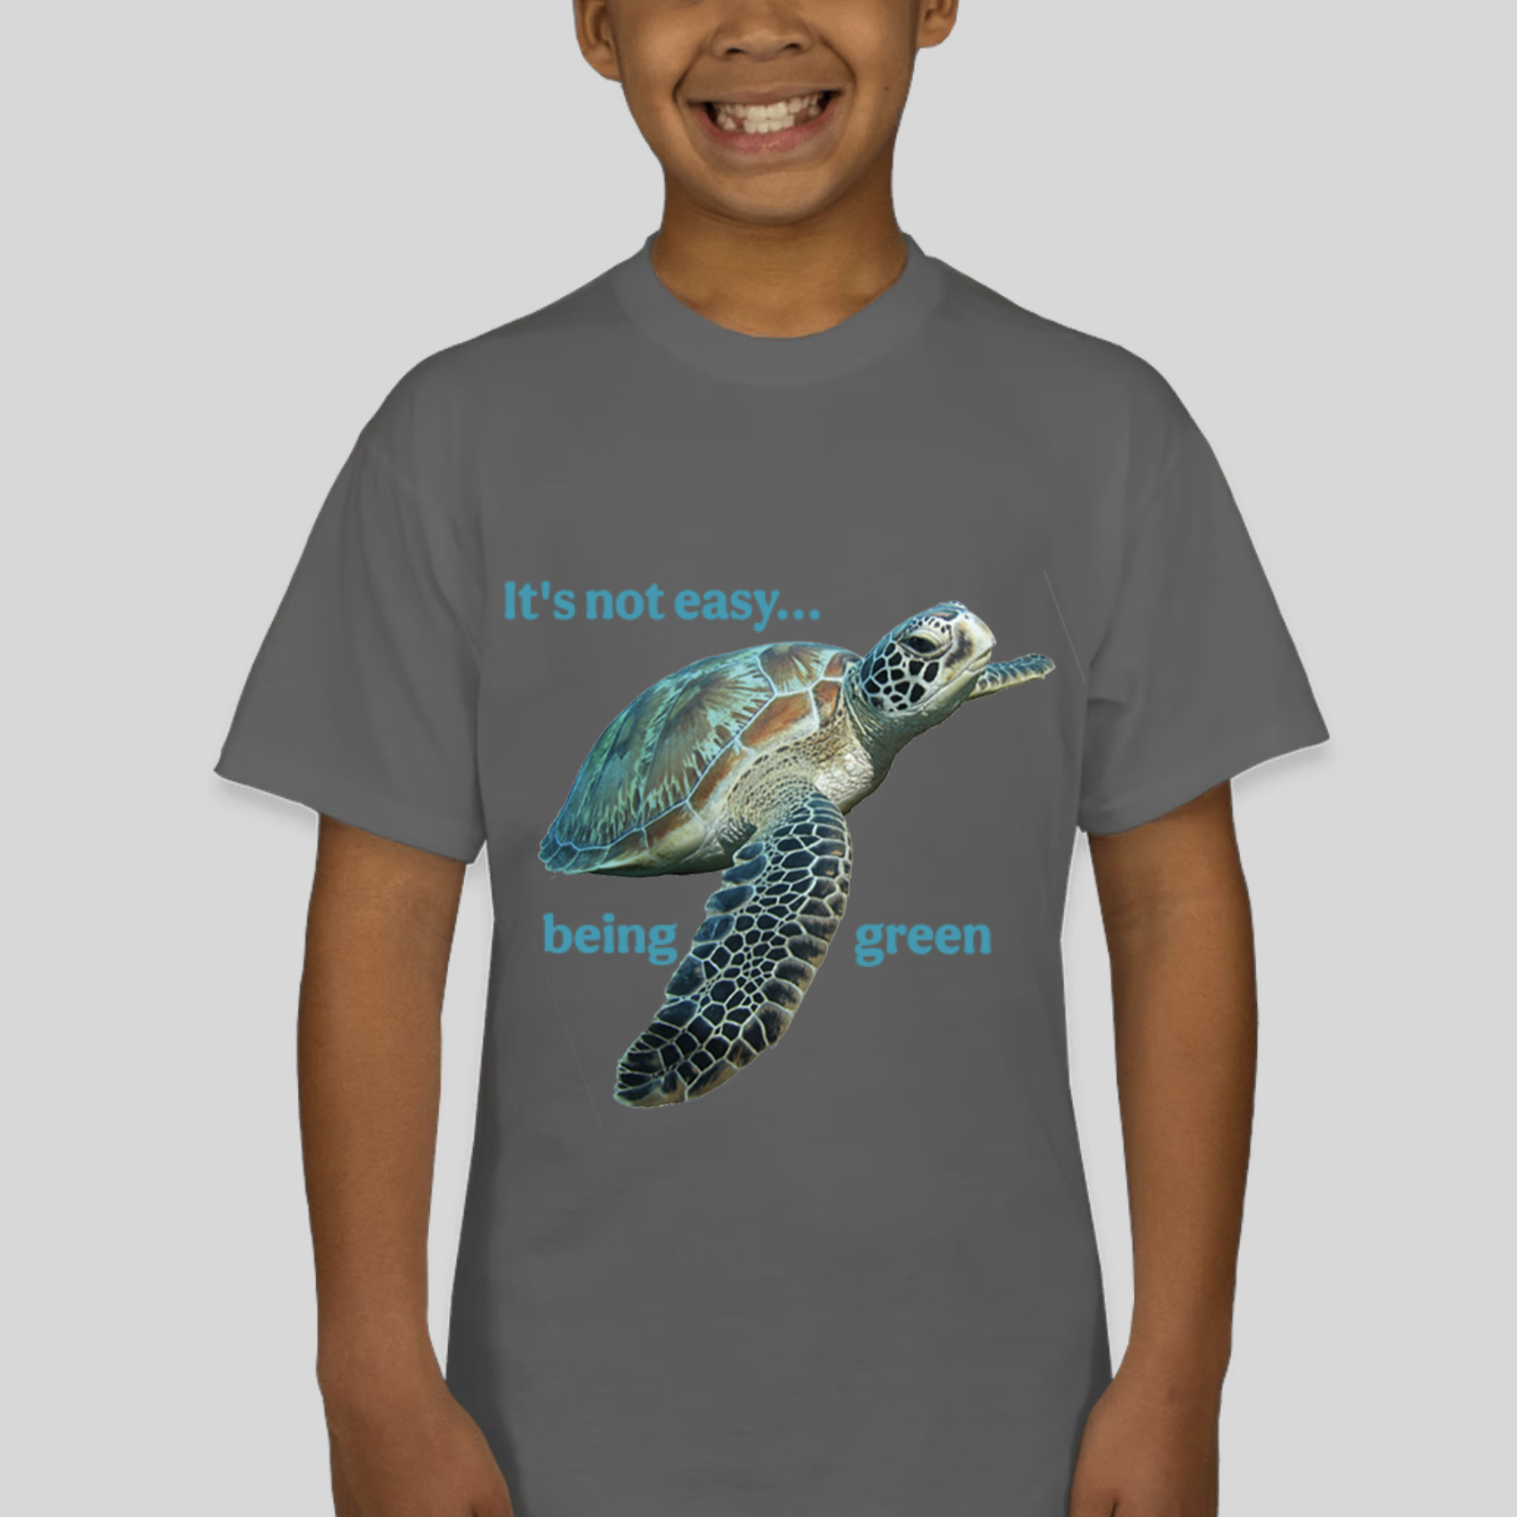 http://www.socalseaturtles.org/uploads/8/0/5/6/80569258/s144592113637786395_p4_i1_w1517.png